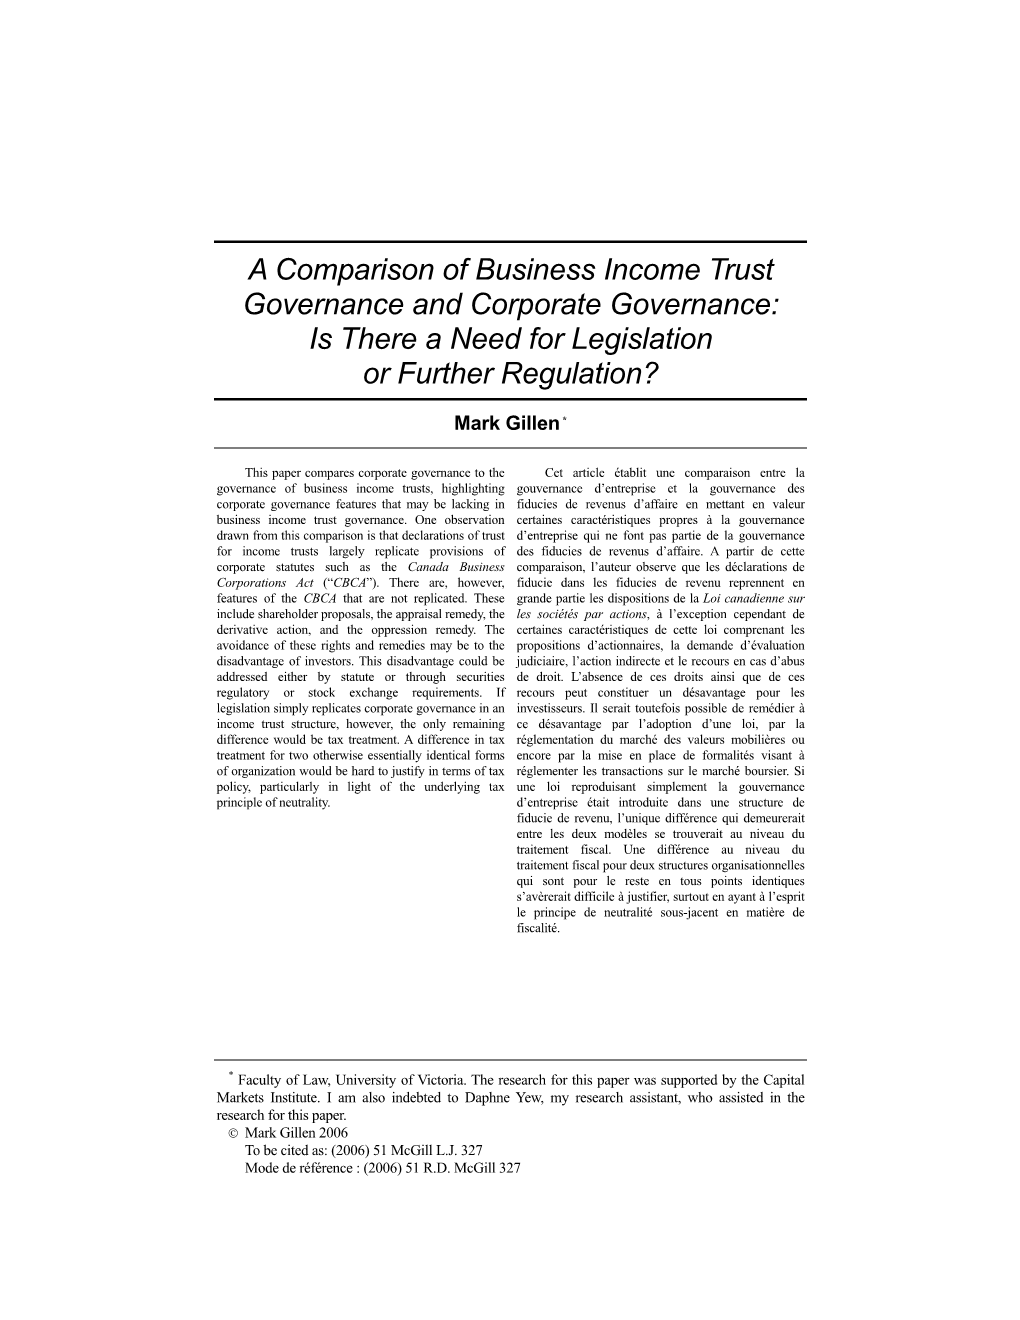 A Comparison of Business Income Trust Governance and Corporate Governance: Is There a Need for Legislation Or Further Regulation?